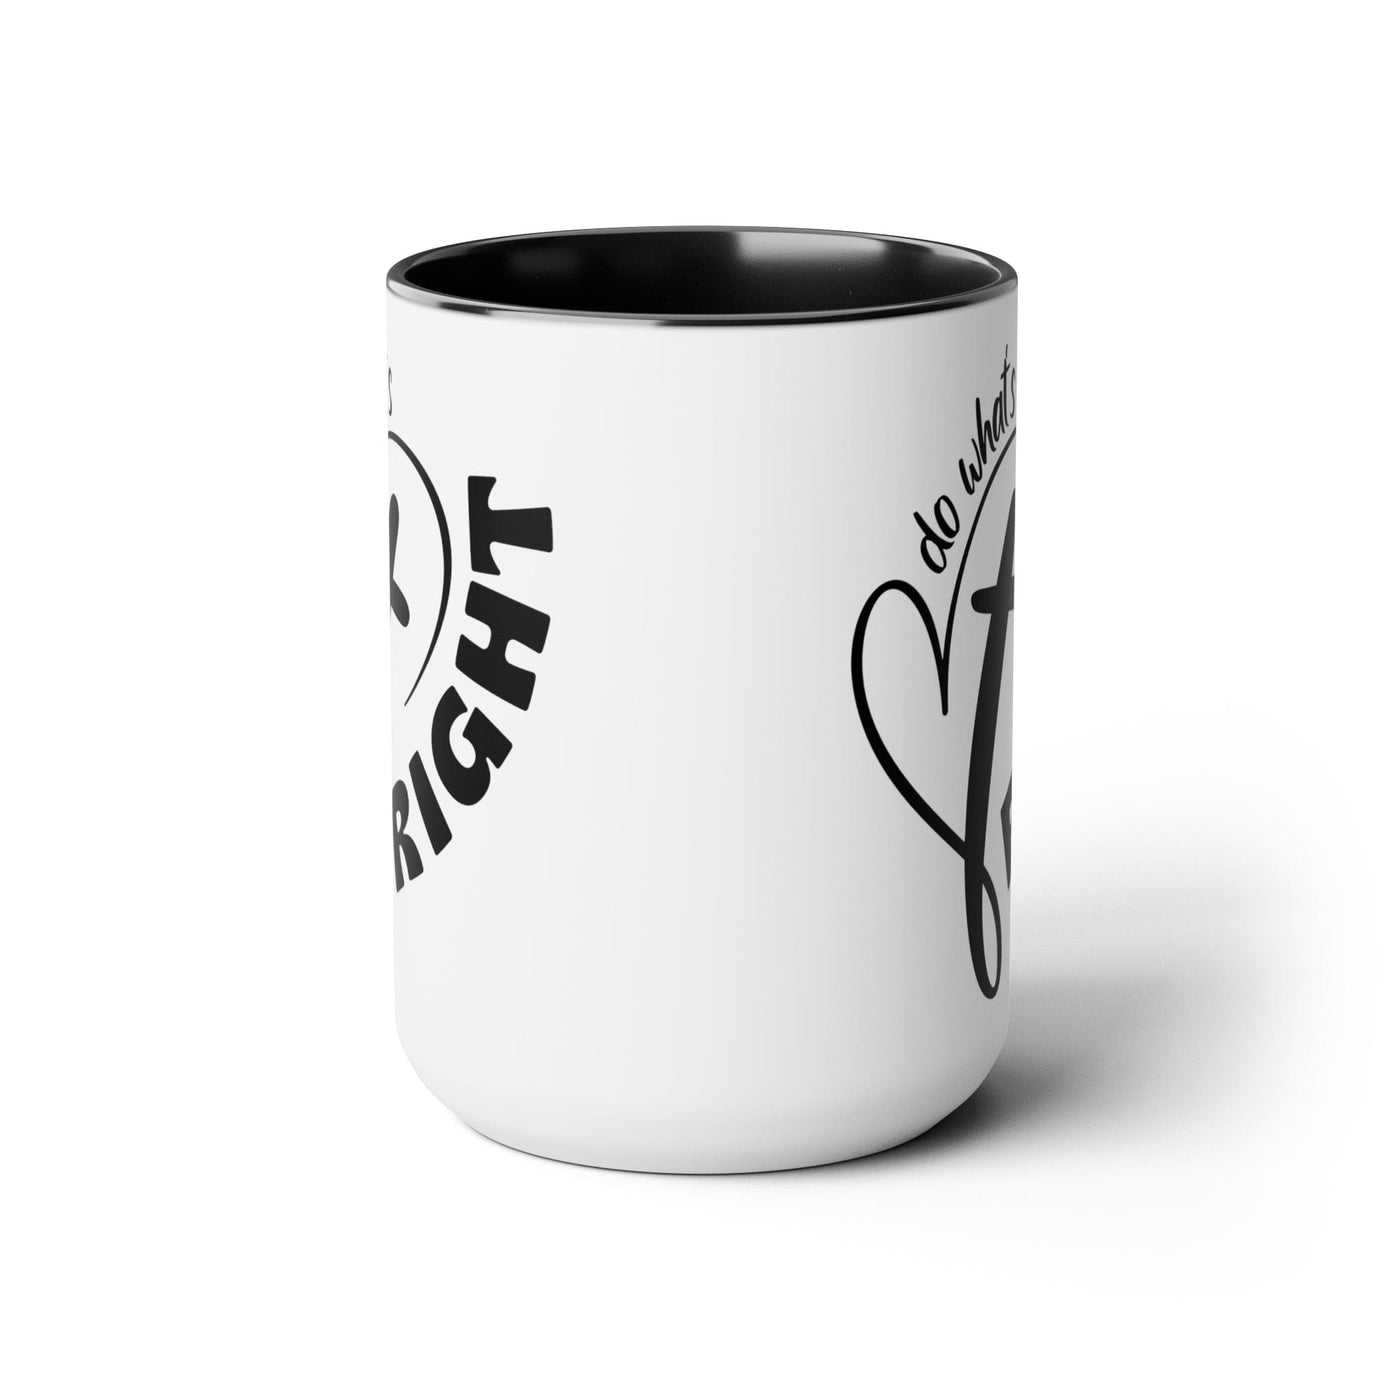 Accent Ceramic Coffee Mug 15oz - Say It Soul - Do What’s Right Black